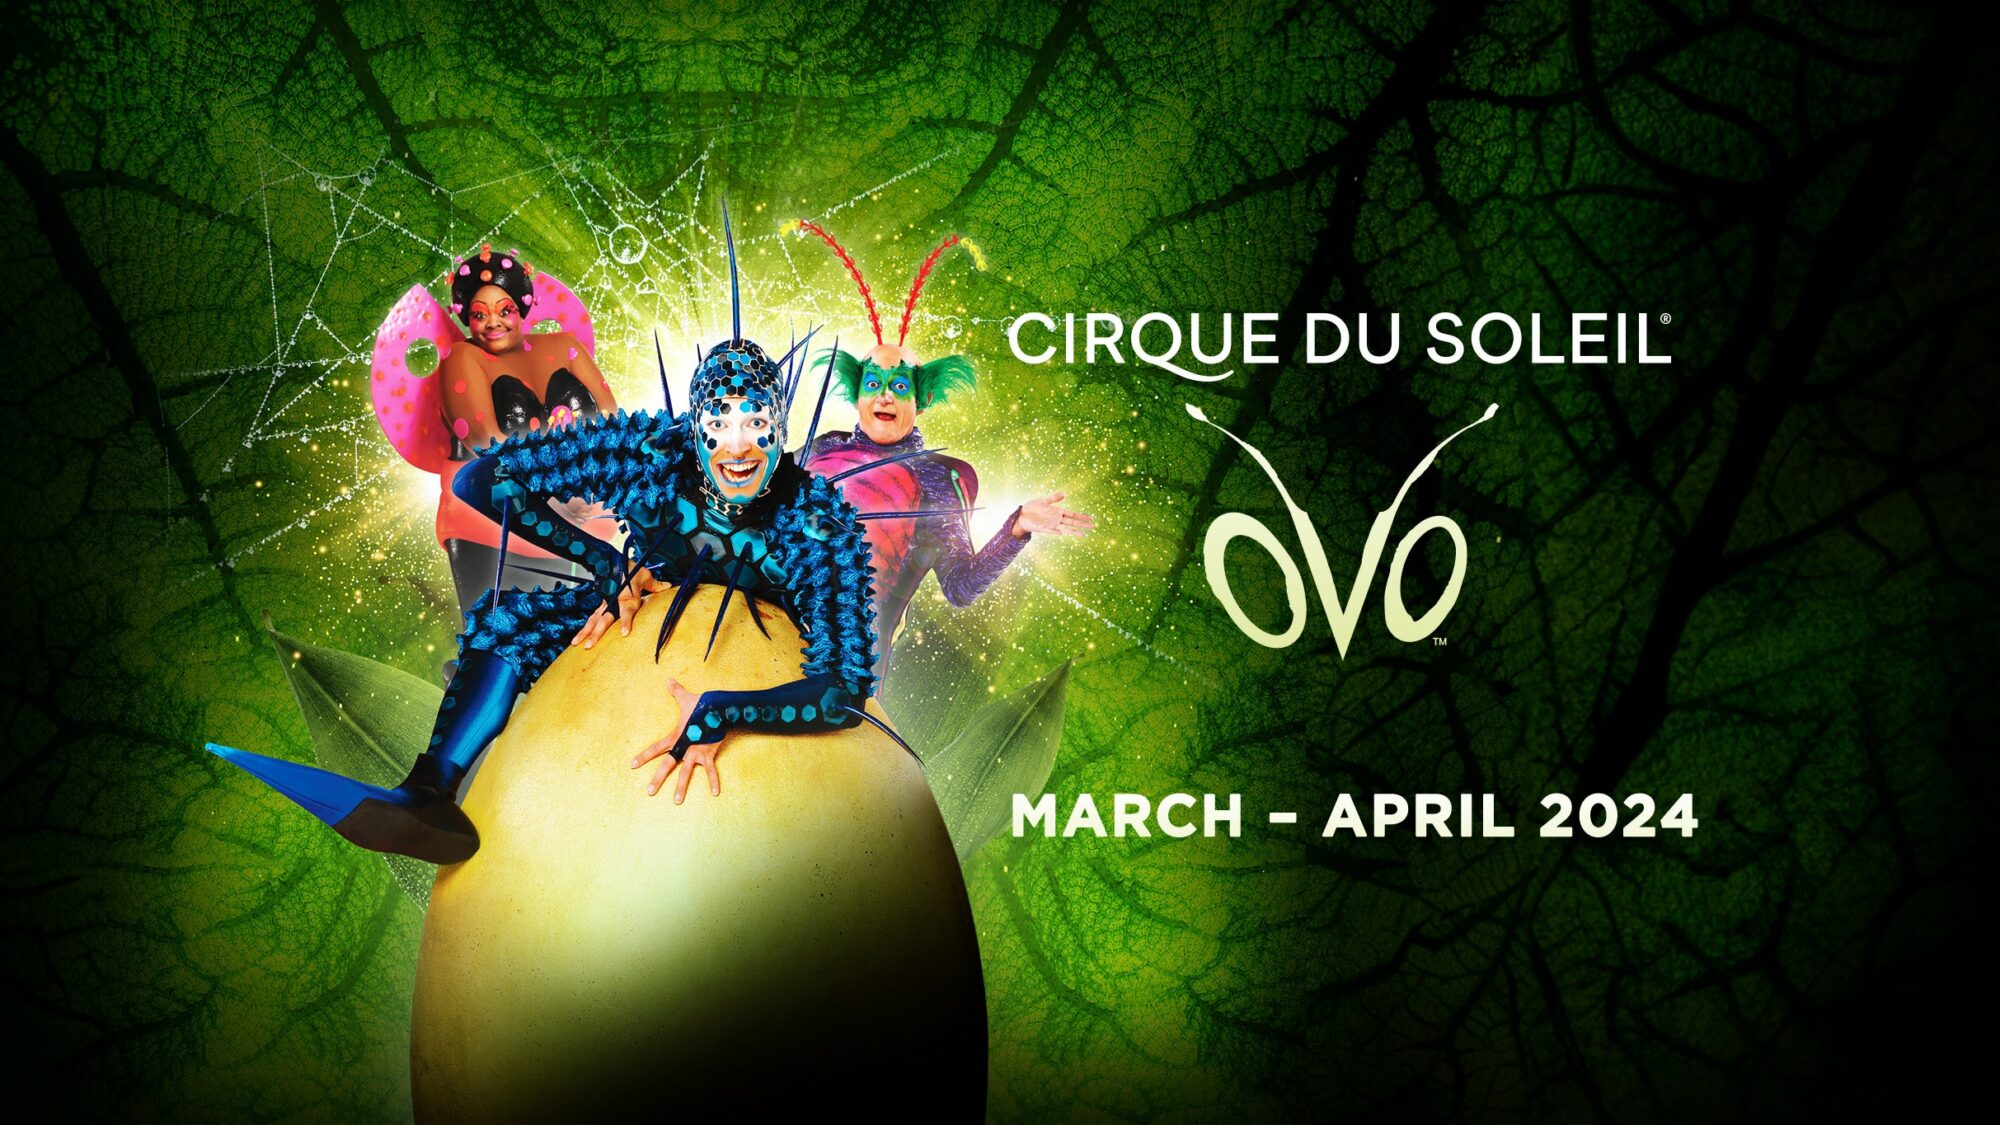 Image name Cirque Du Soleil Ovo at First Direct Arena Leeds the 30 image from the post Cirque Du Soleil : Ovo at First Direct Arena, Leeds in Yorkshire.com.